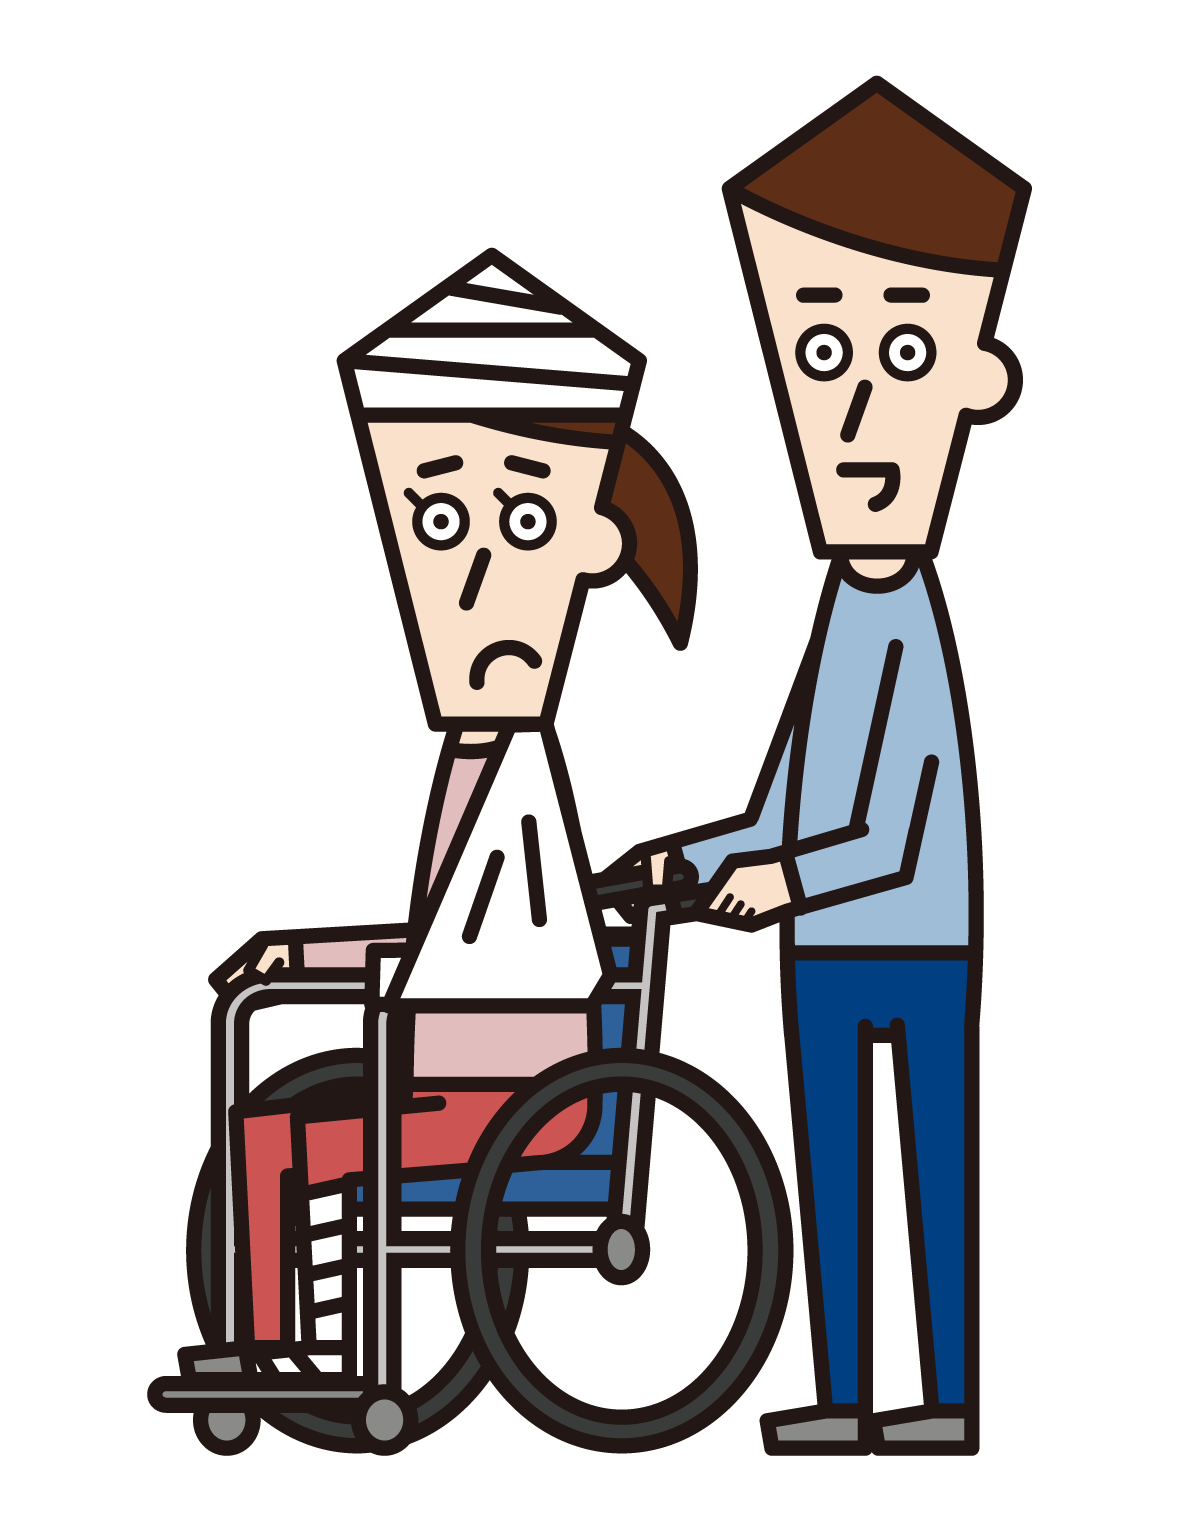 Illustration of a woman who is seriously injured and in a wheelchair